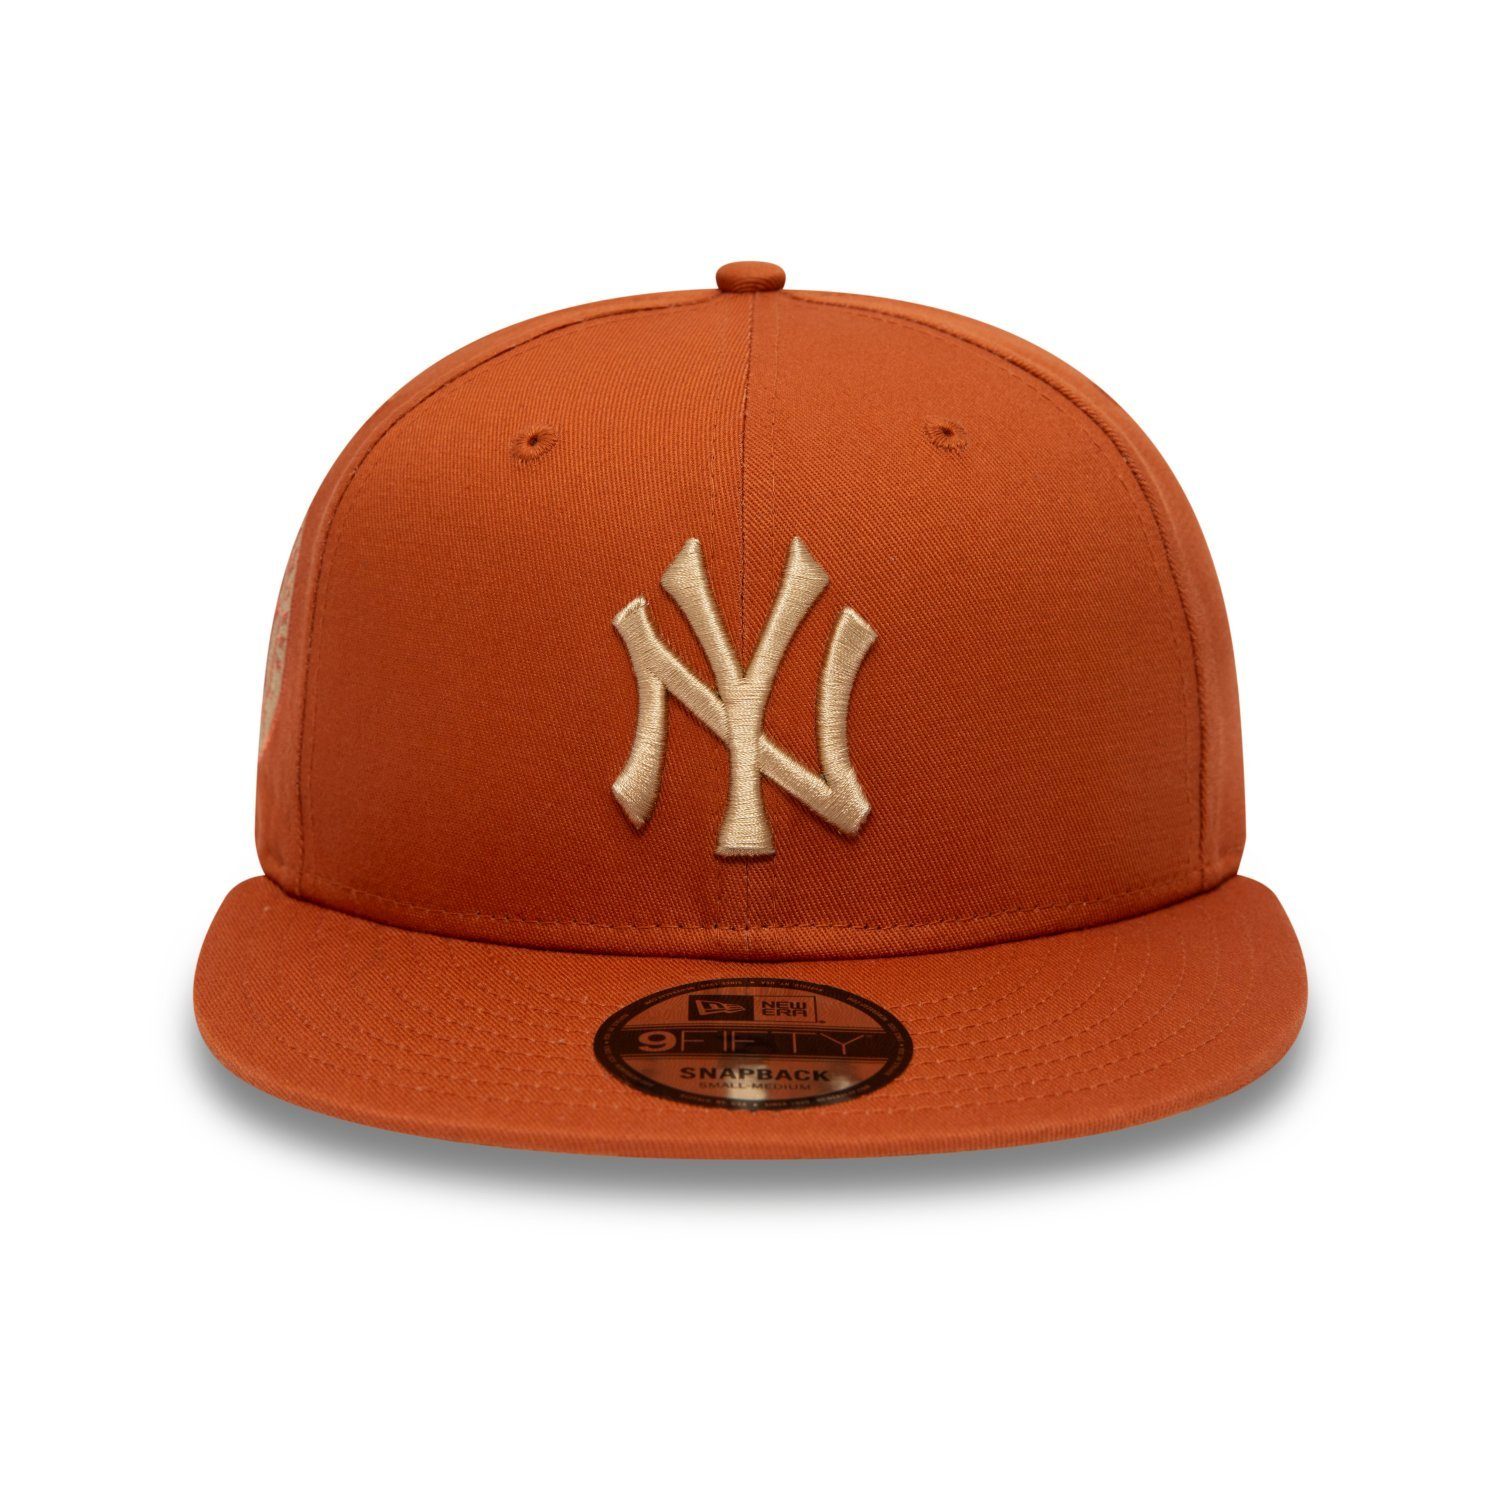 New Cap New York Yankees rost PATCH SIDE Snapback Era 9Fifty